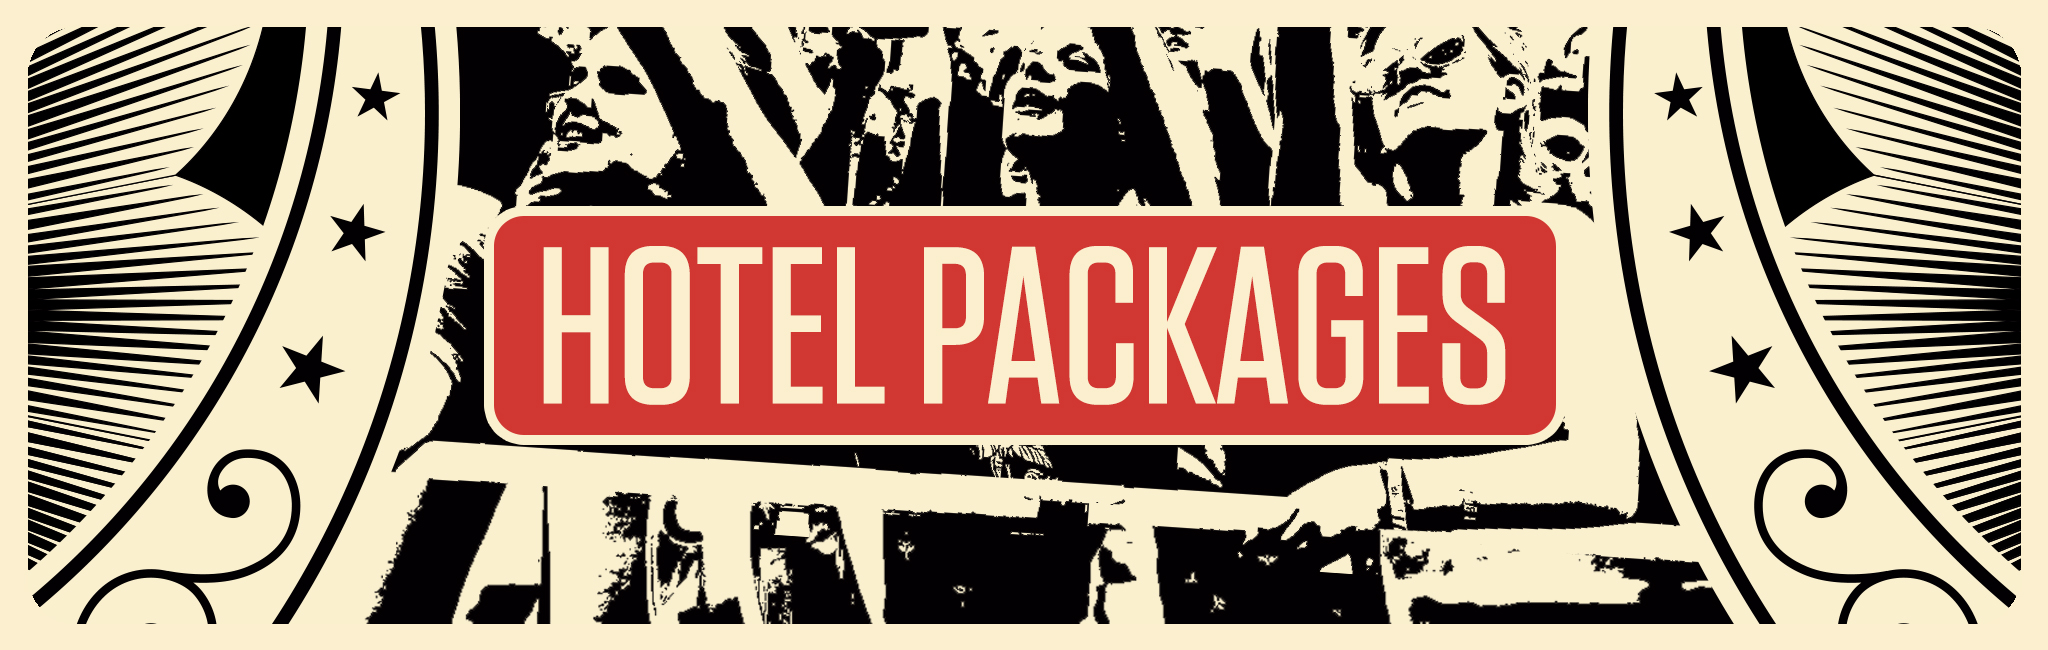 Sonic Temple Hotel Packages